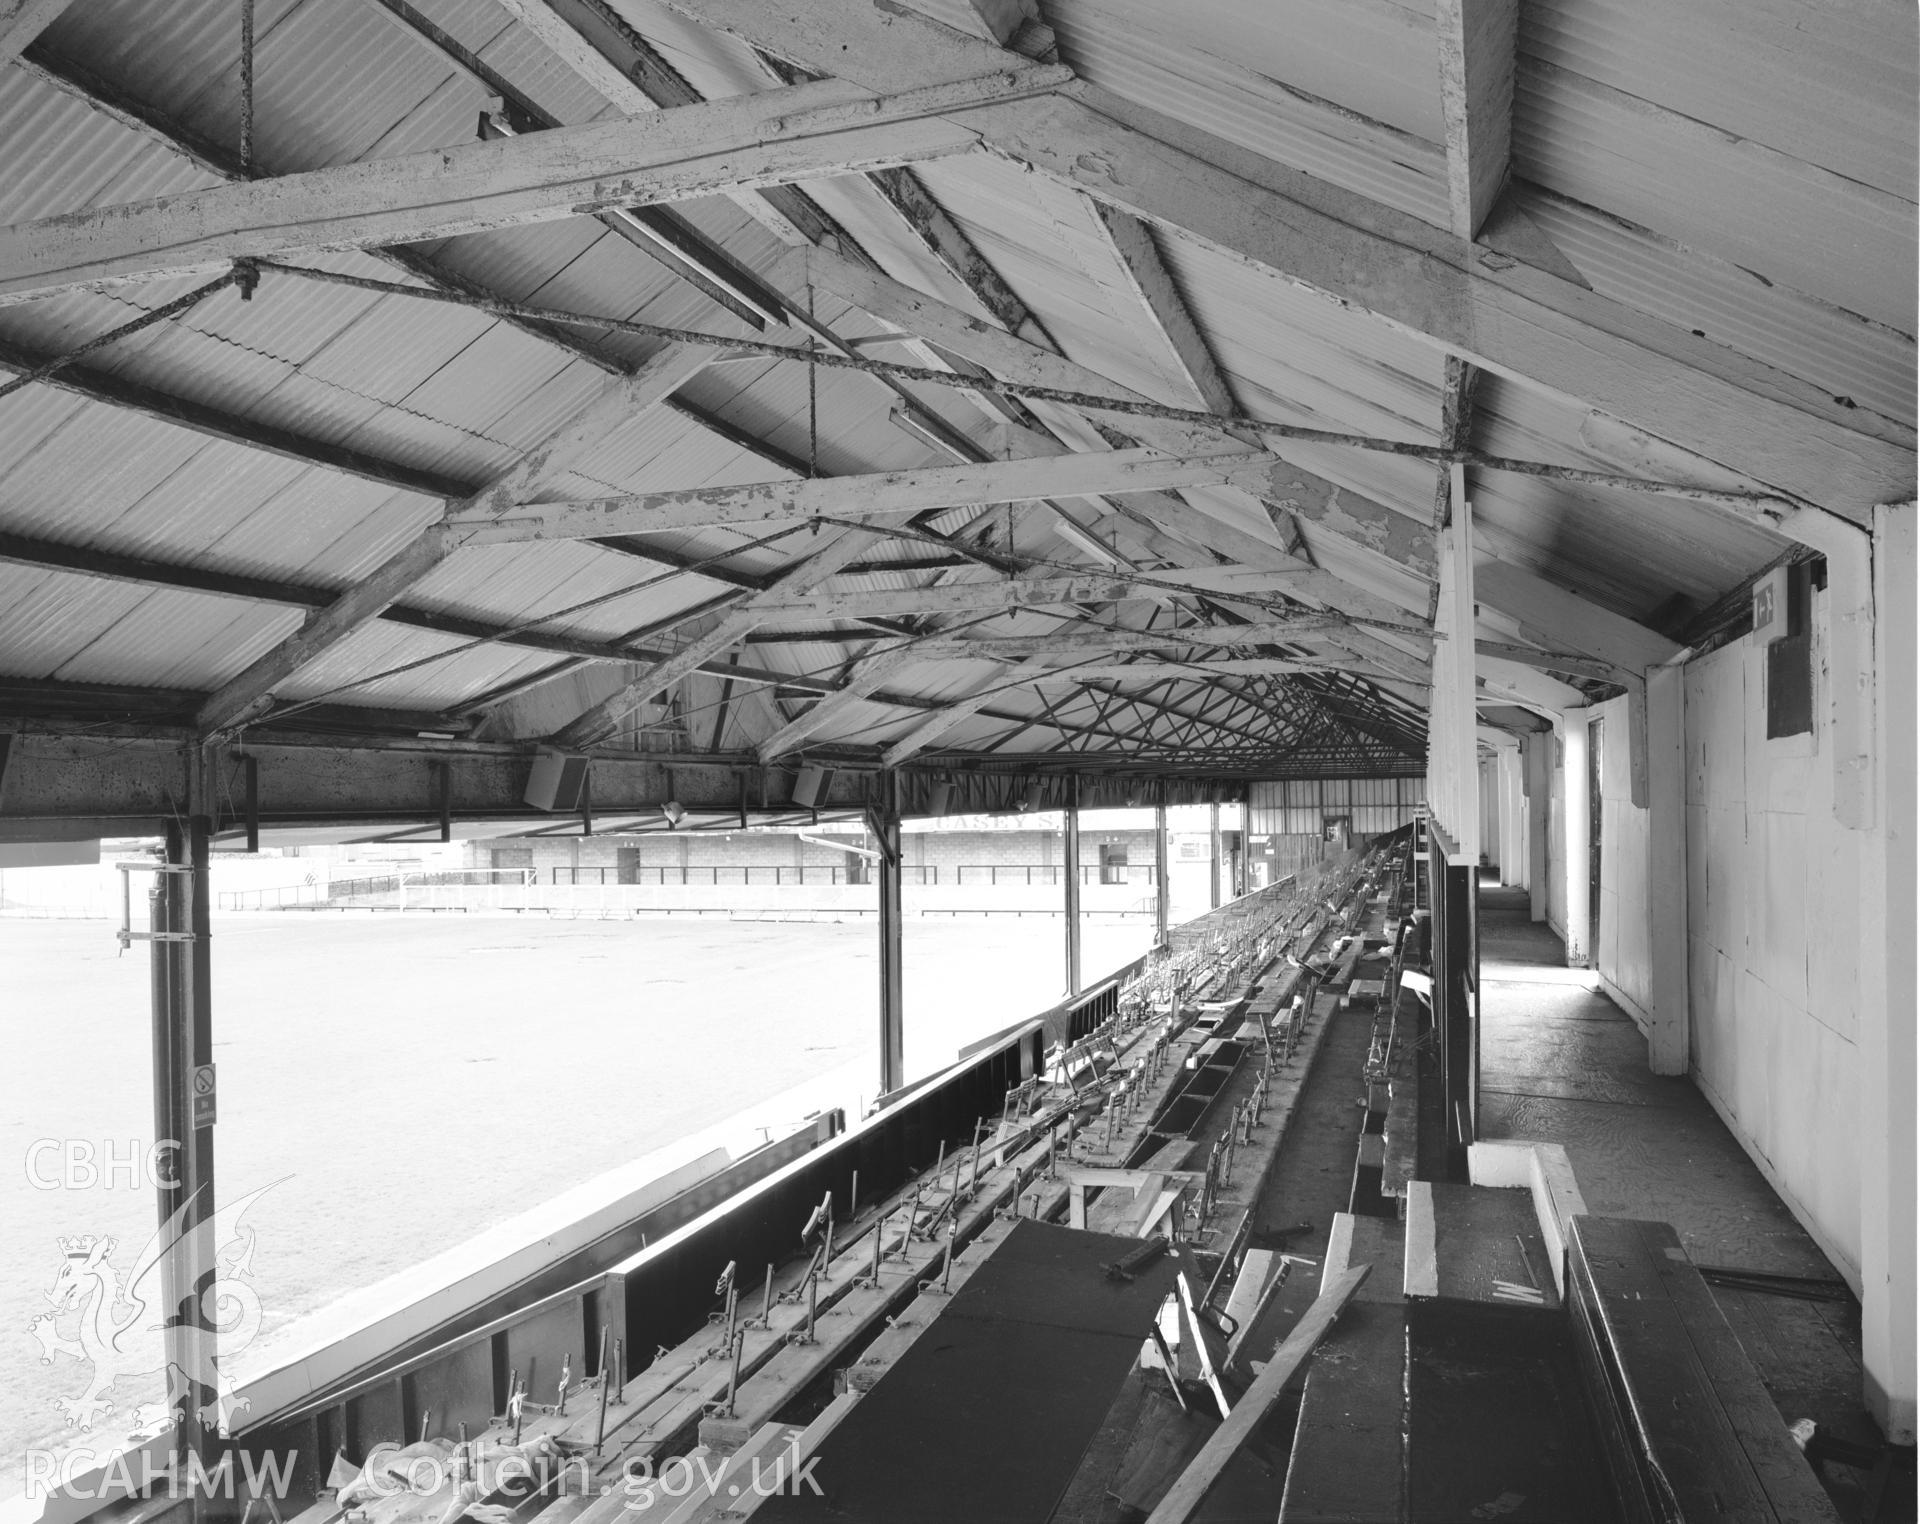 South Stand, interior roof and seating.